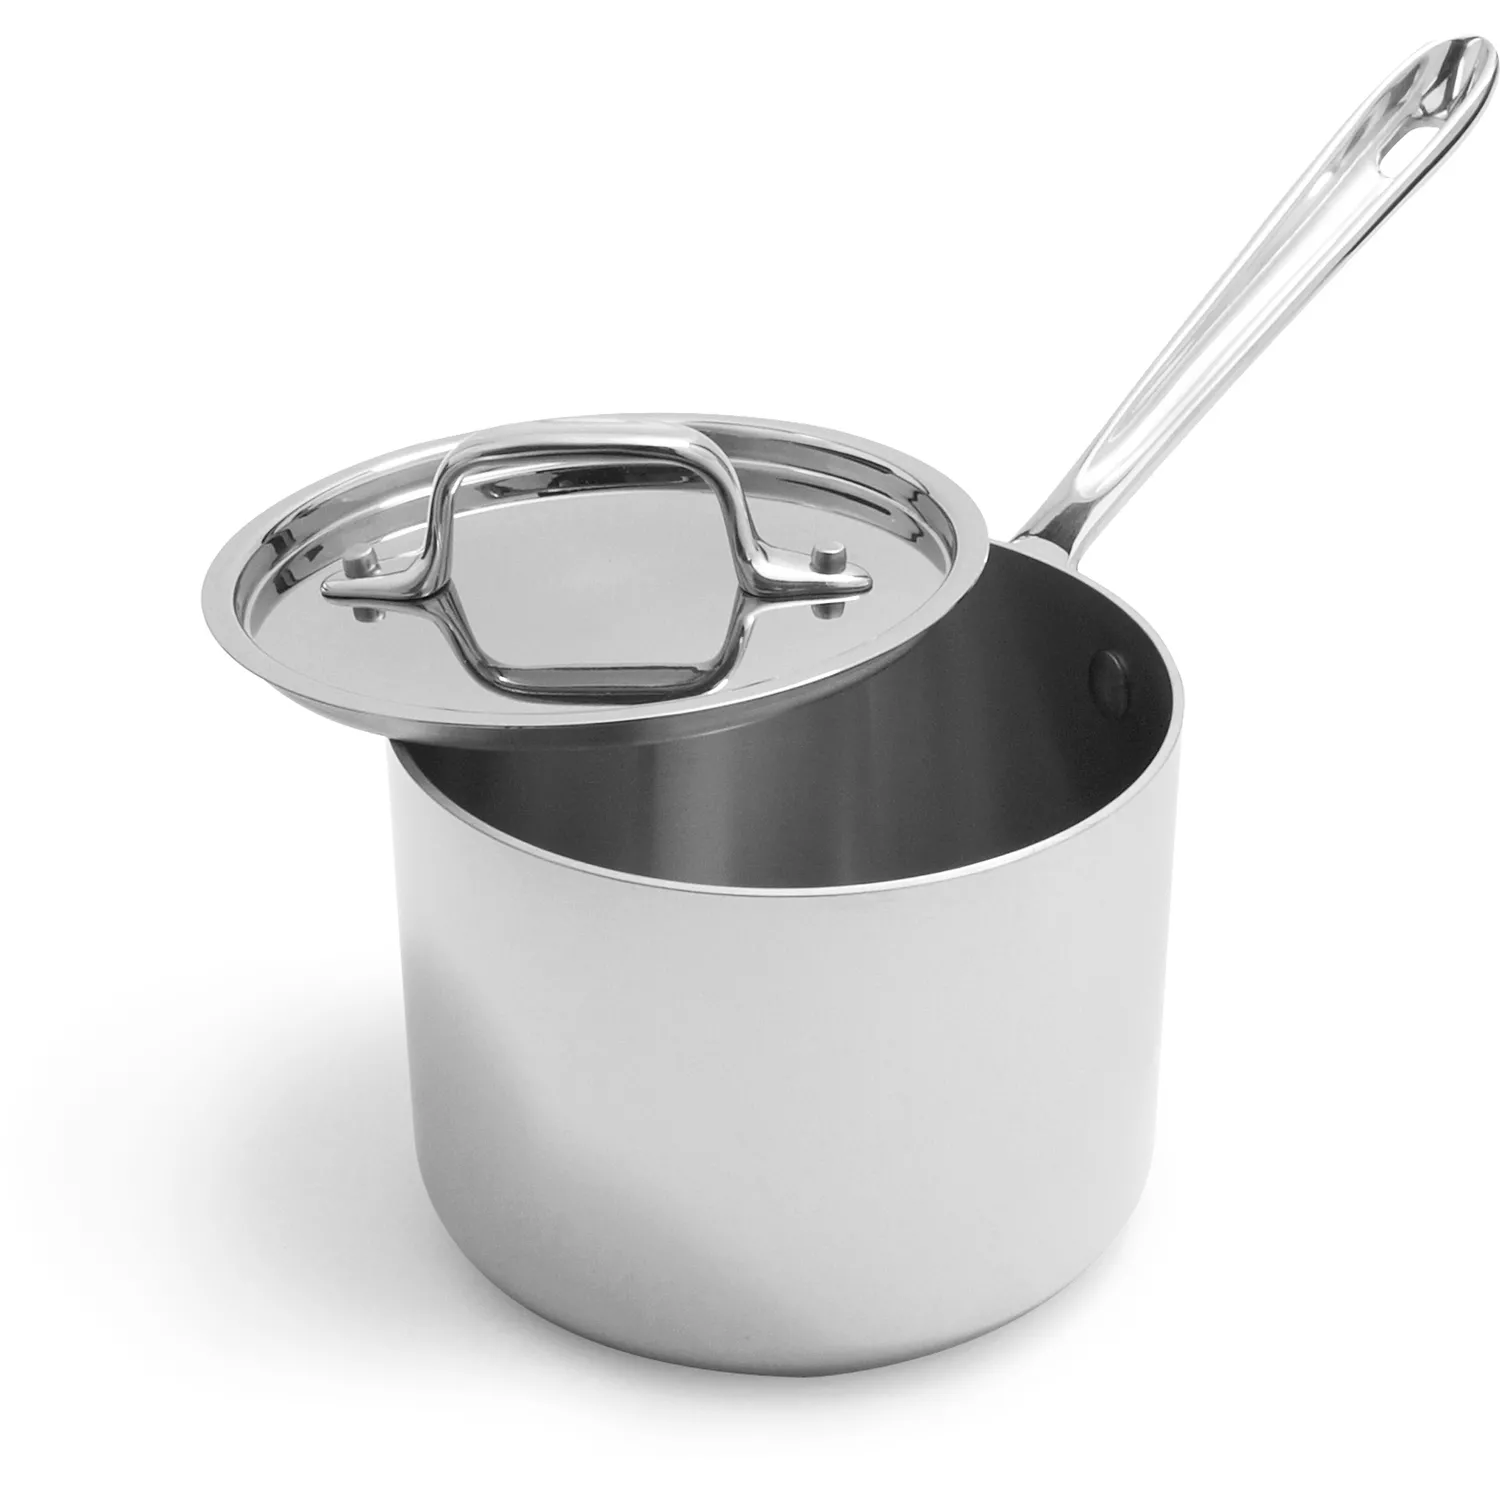 Calphalon Tri-Ply Stainless Steel 1.5-Quart Saucepan with Cover 